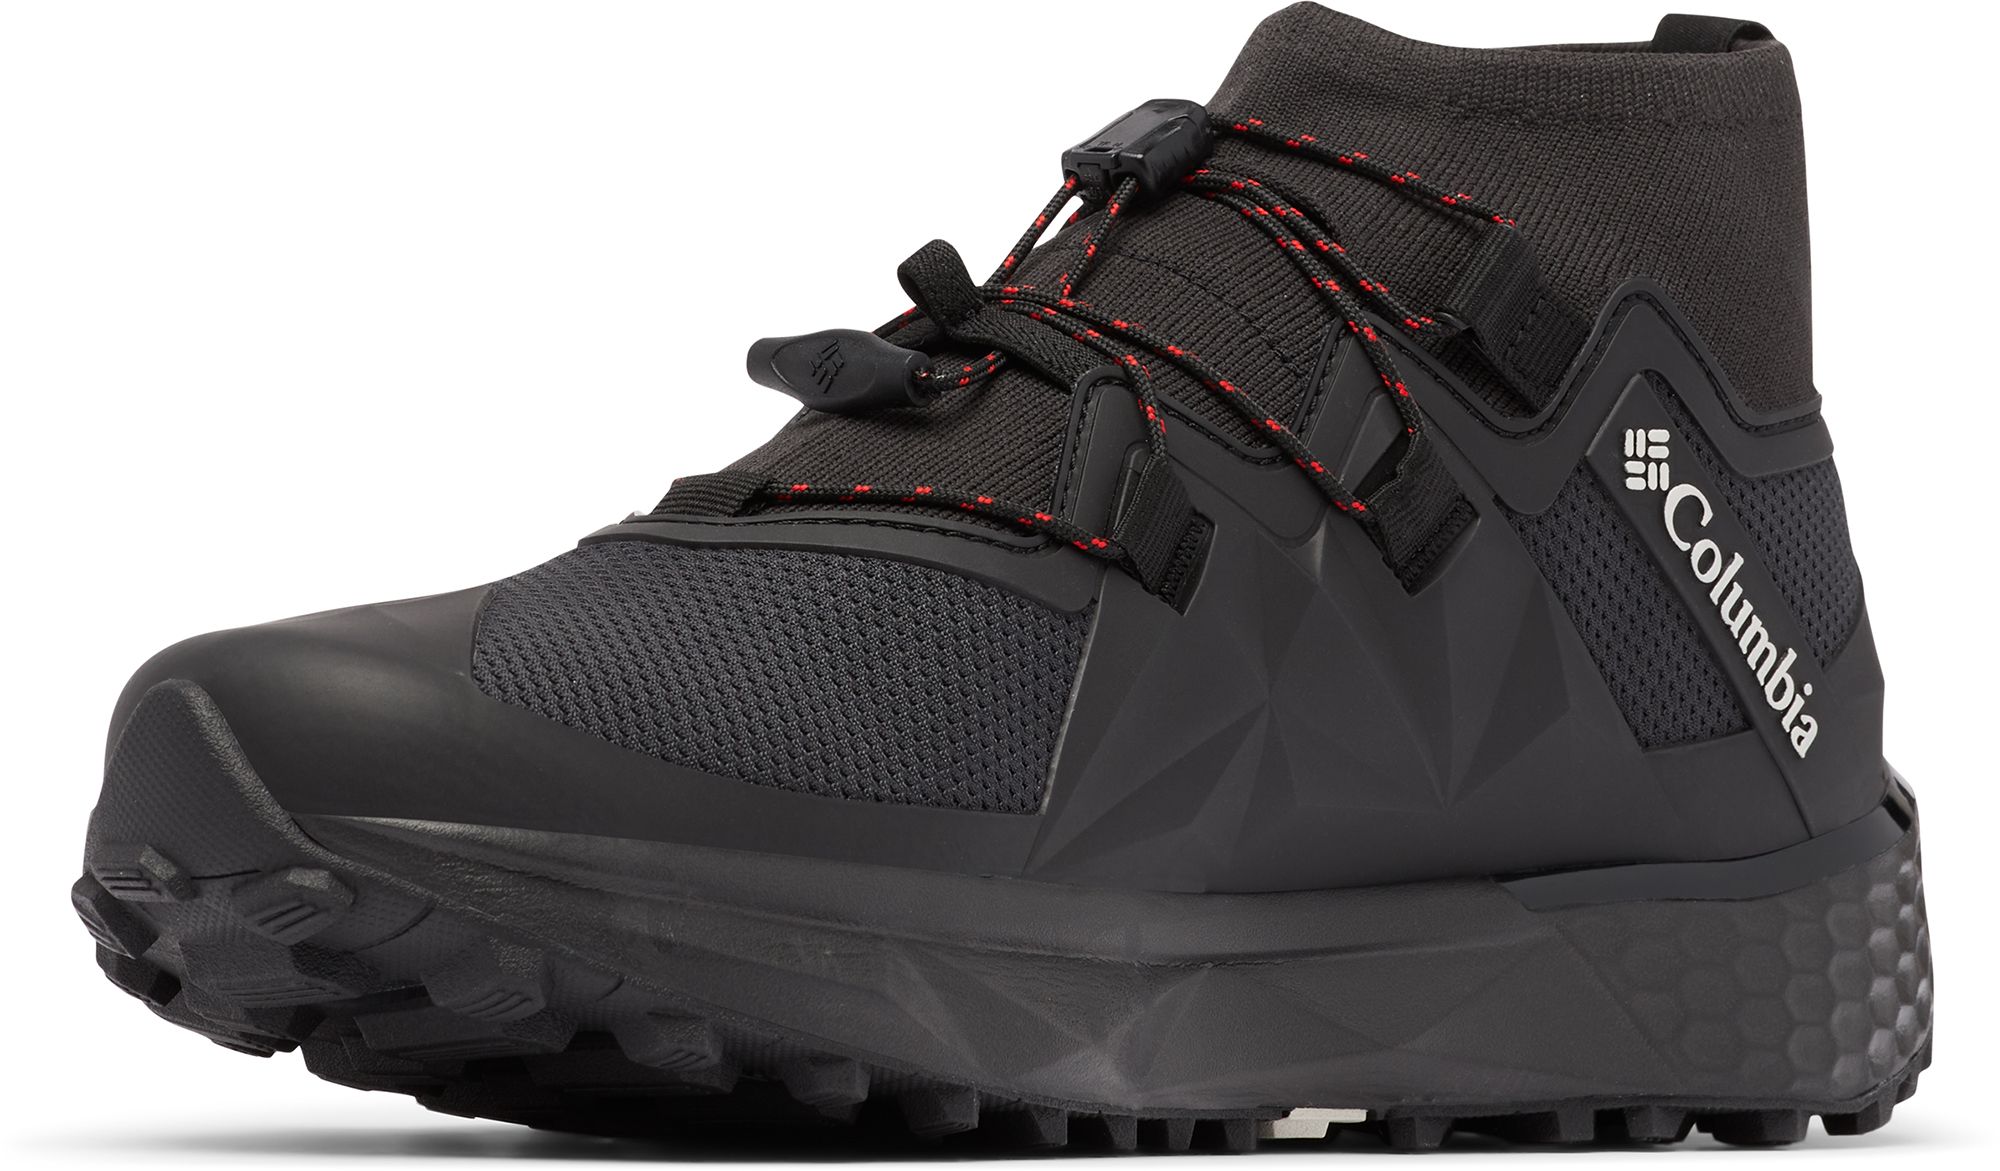 Columbia Men's Facet 75 Alpha Outdry Waterproof Hiking Shoes